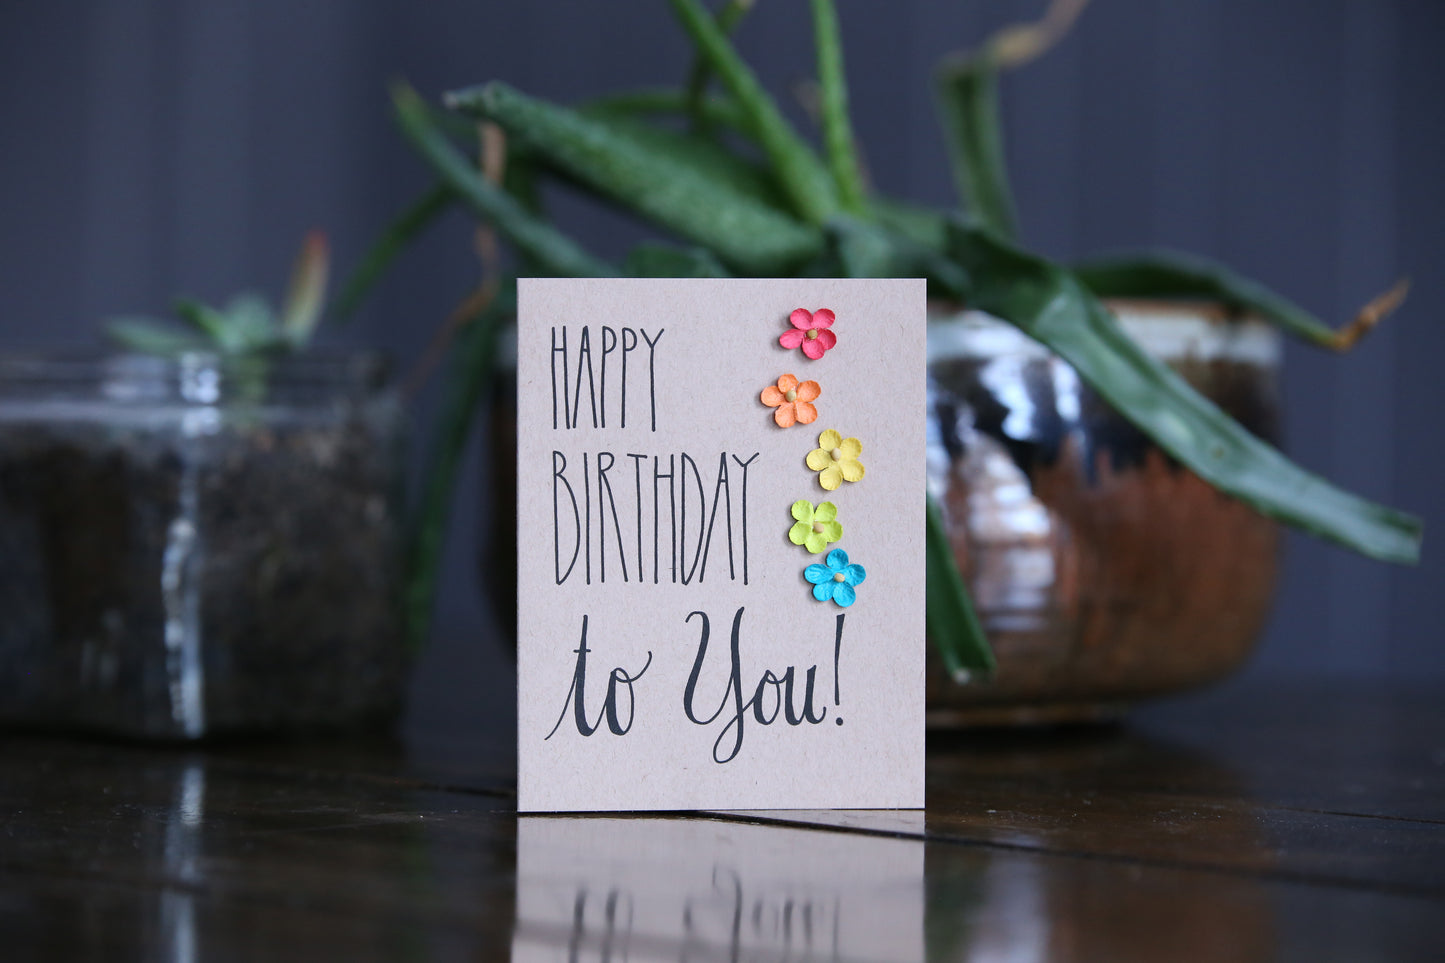 Happy Birthday to You!  Say it with Flowers.